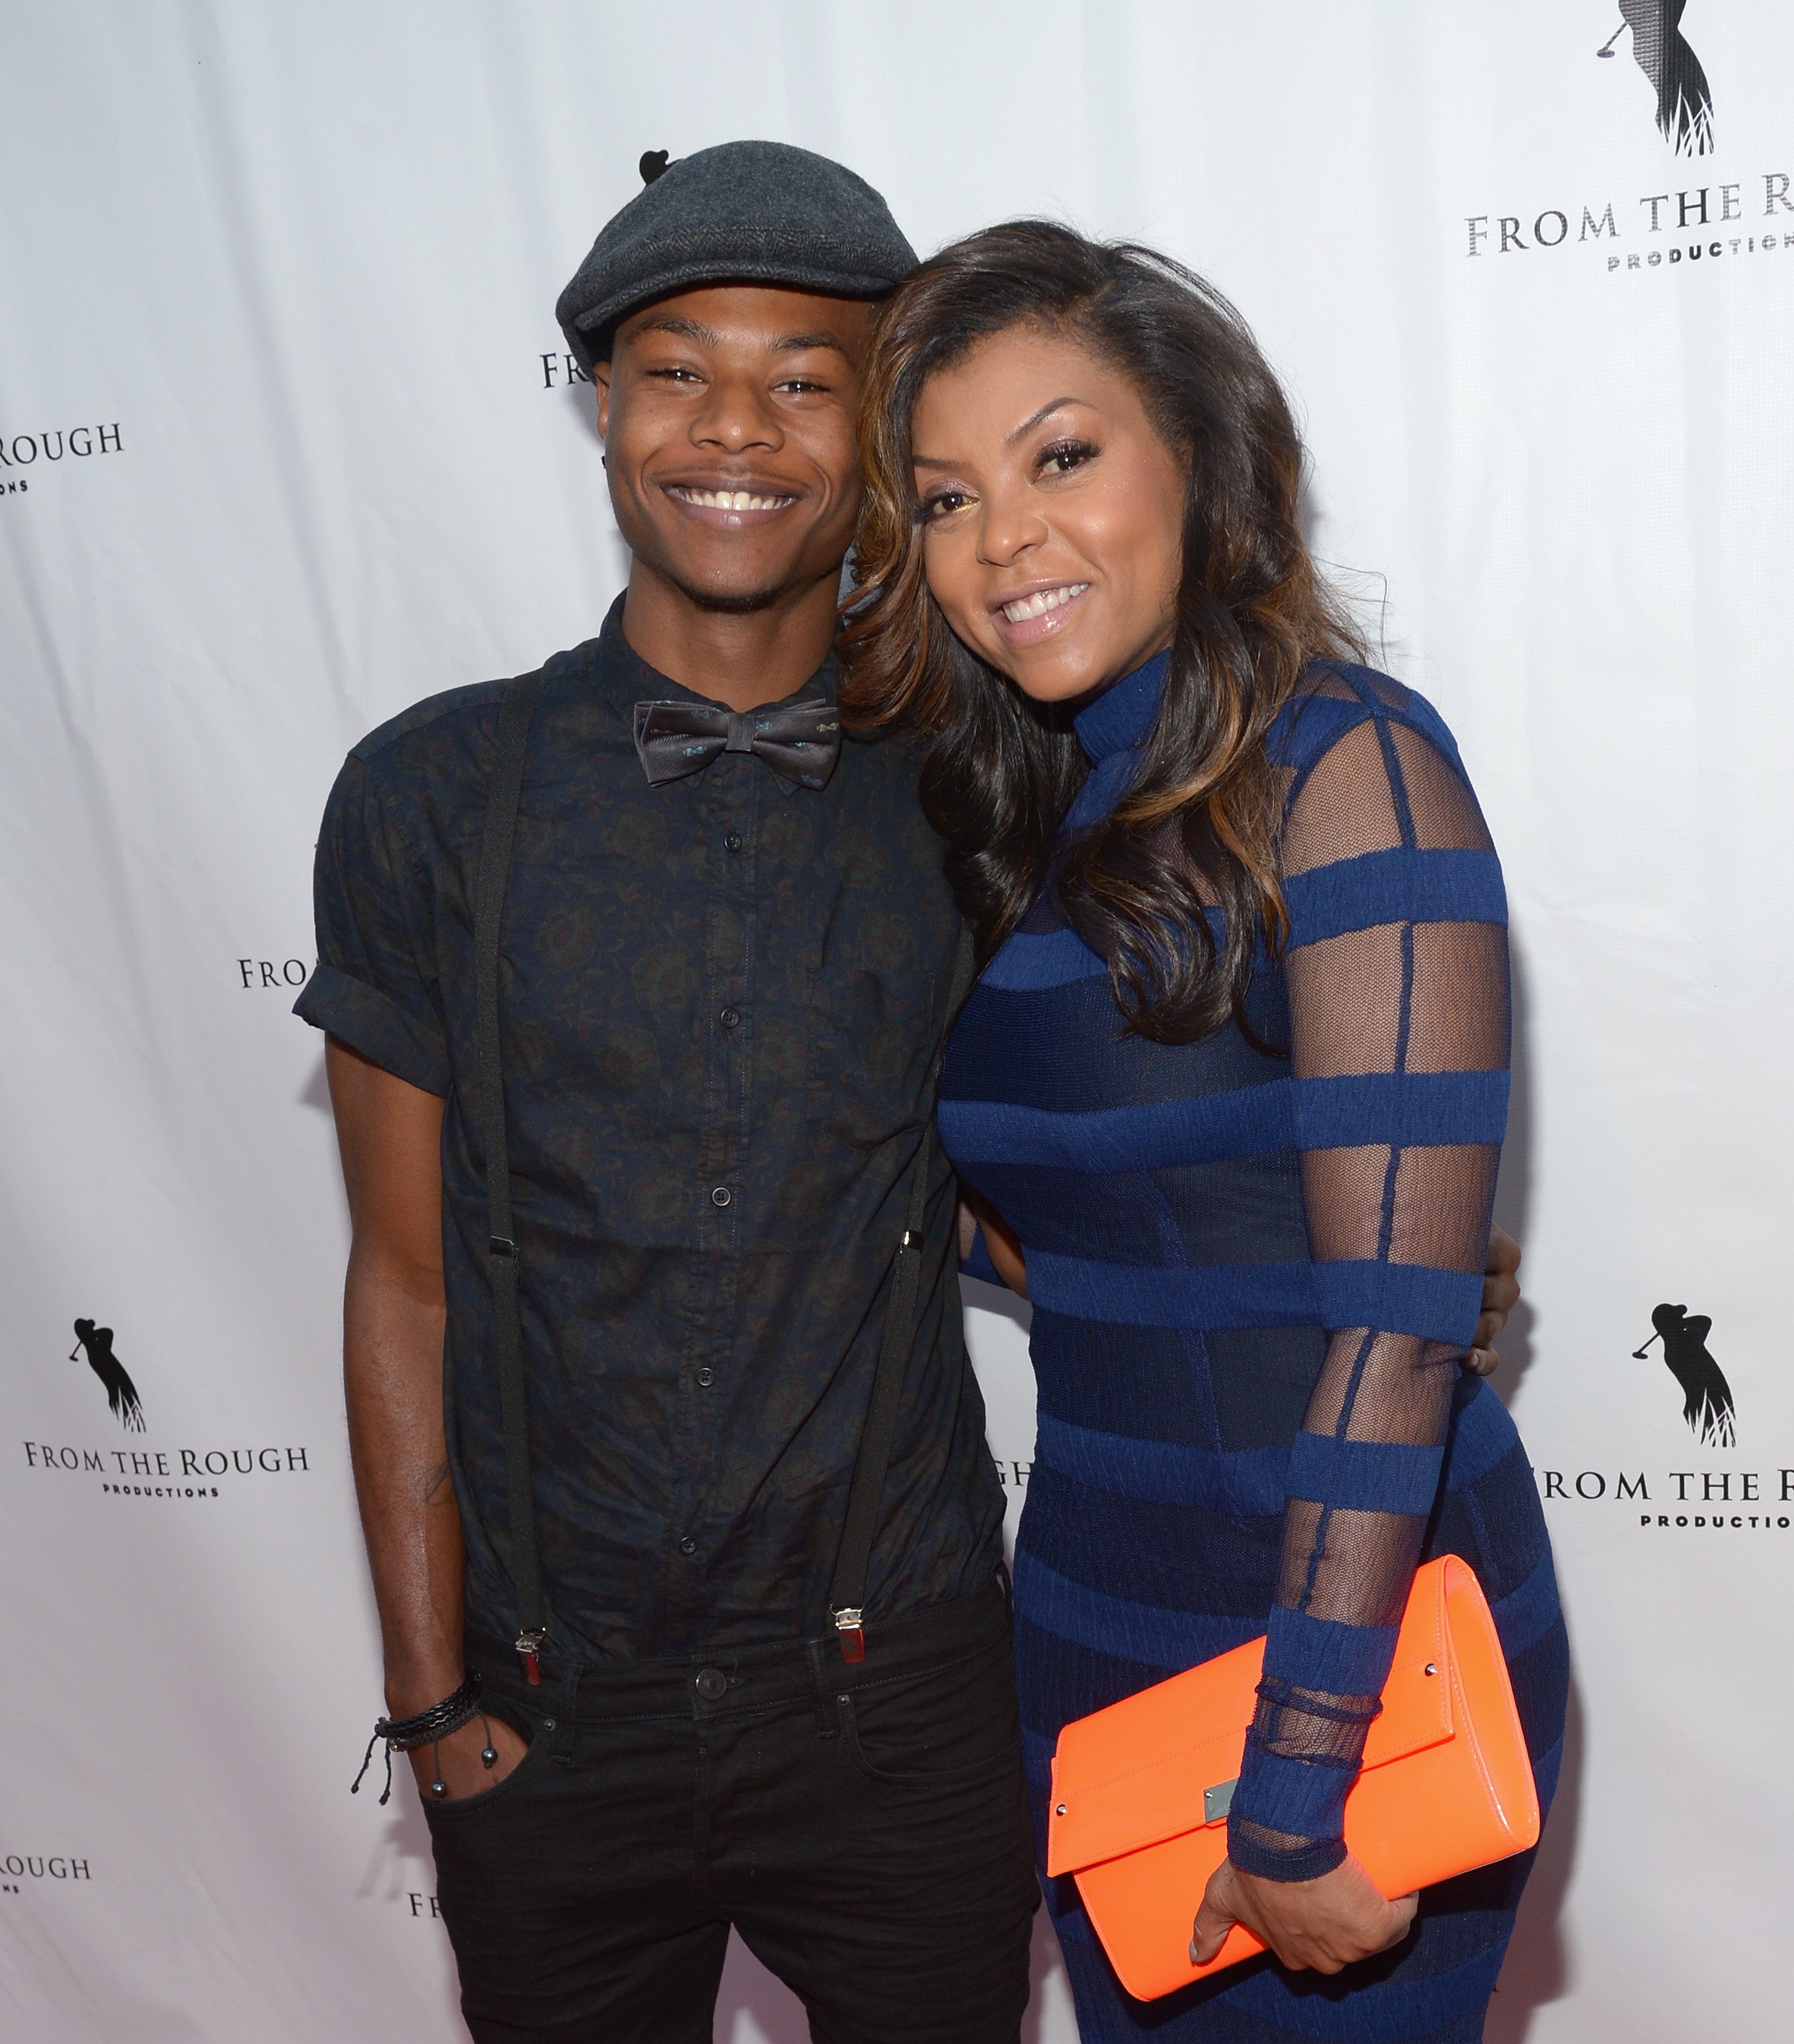 Taraji P. Henson and her son, Marcel Henson, pose at the screening of "From The Rough" at ArcLight Cinemas on April 23, 2014, in Hollywood, California | Source: Getty Images